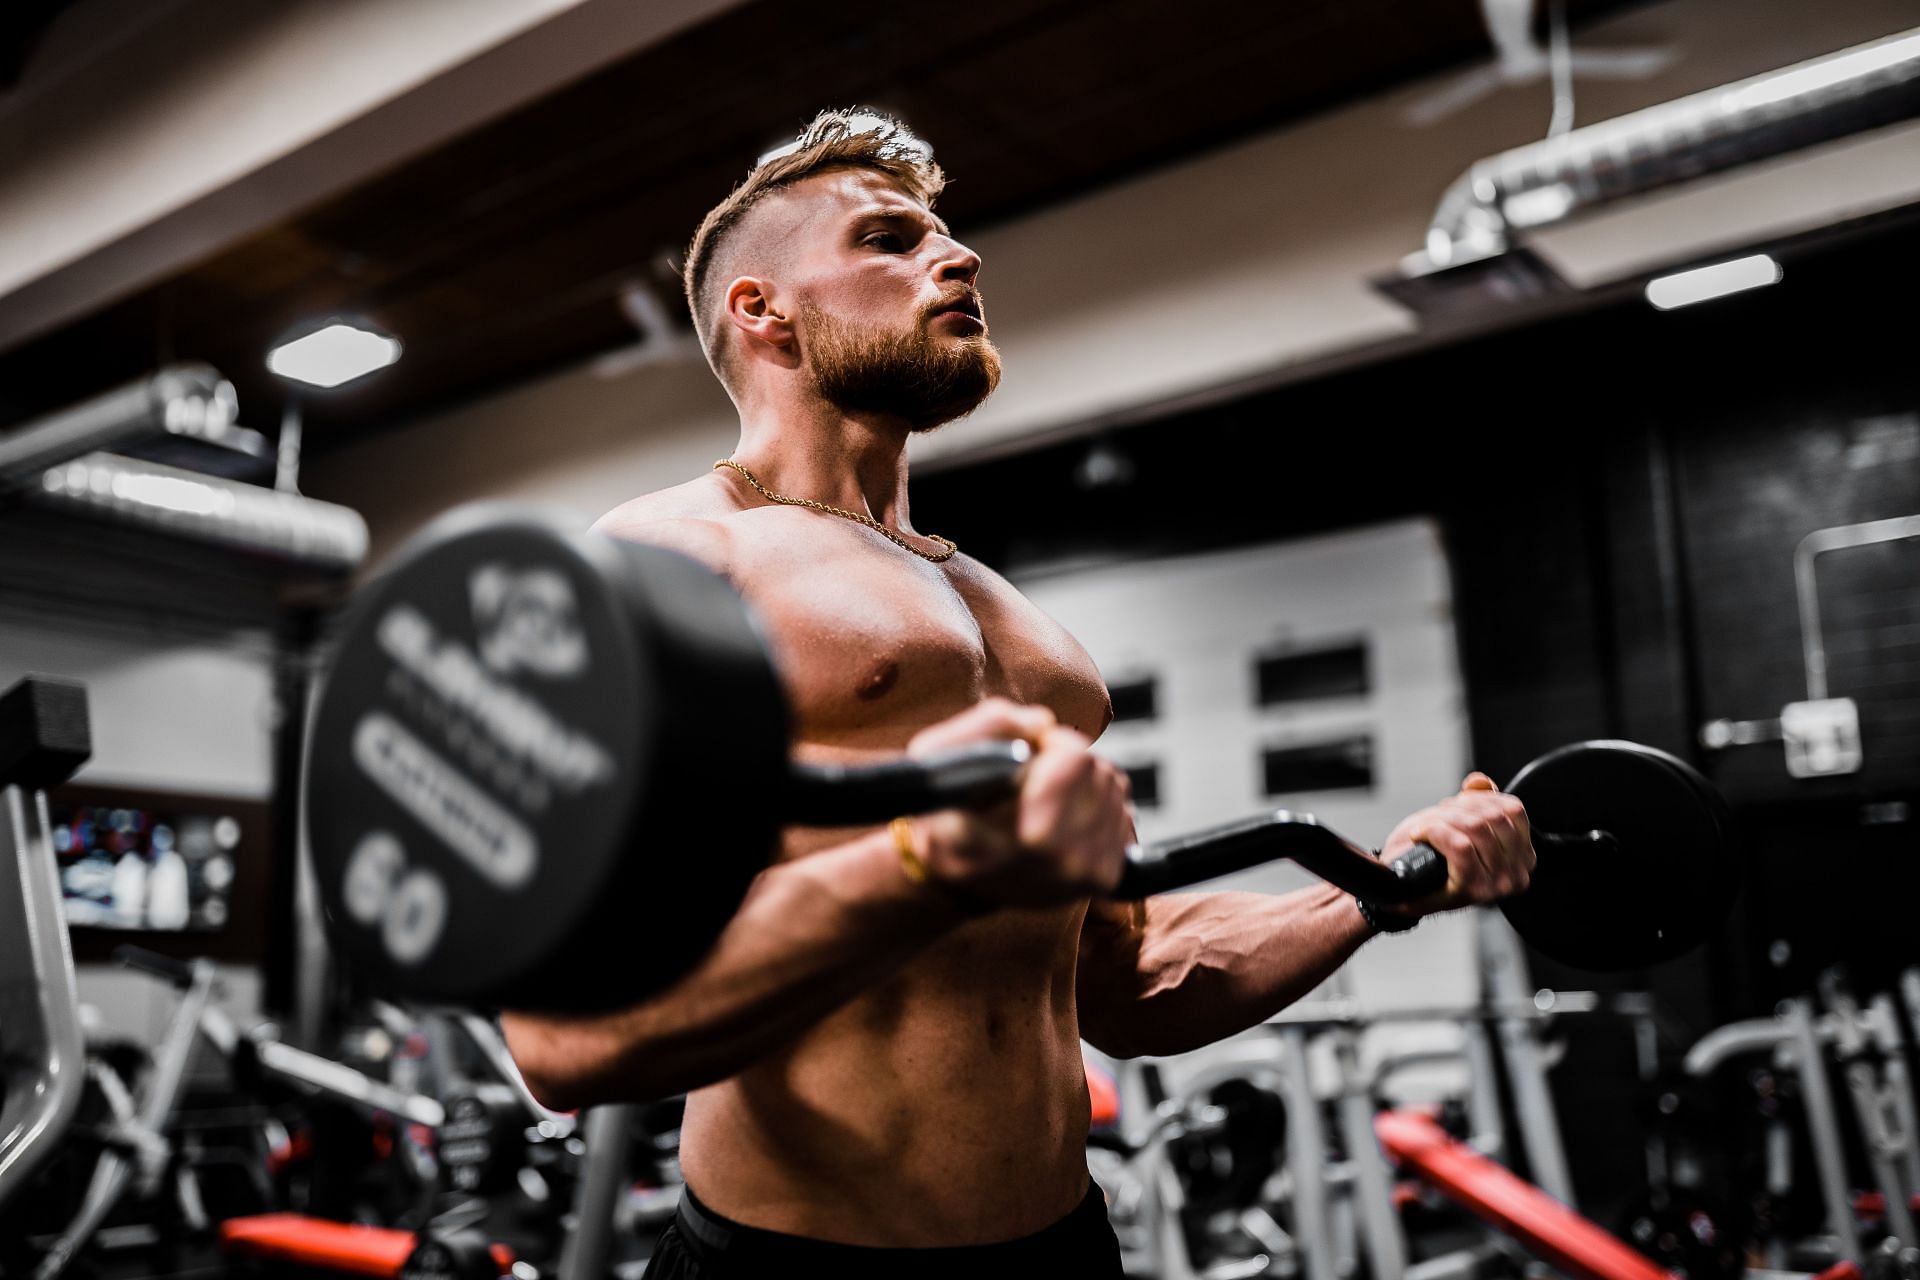 Want to become more buff? These tips will help you out. (Image via unsplash/Anastase Maragos)